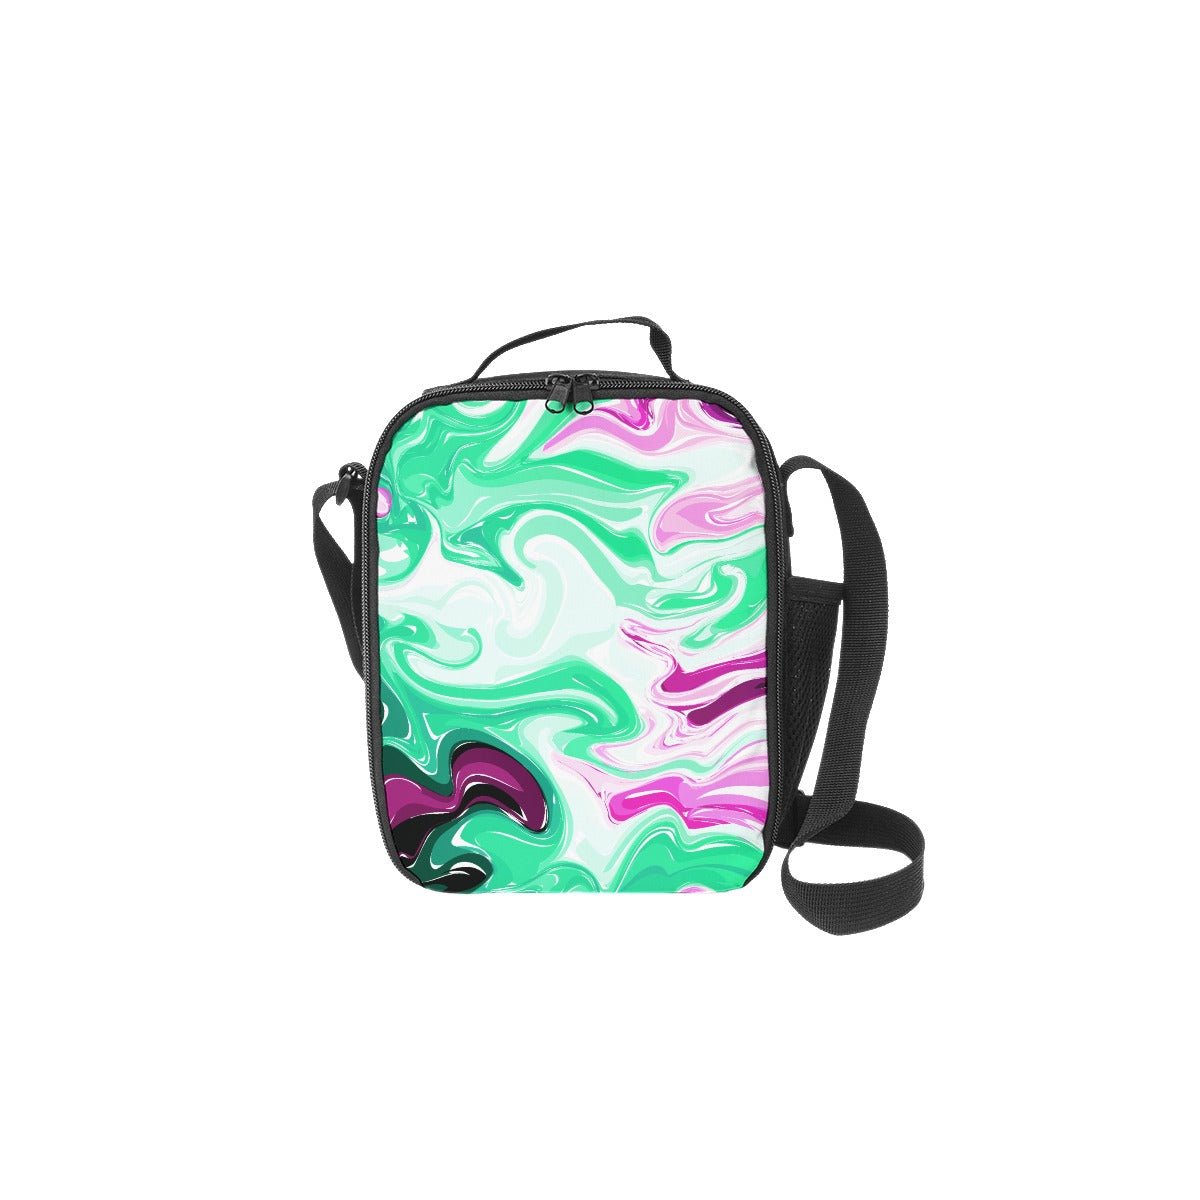 MULTI WAVES LUNCH BAG – dragqueenmerch